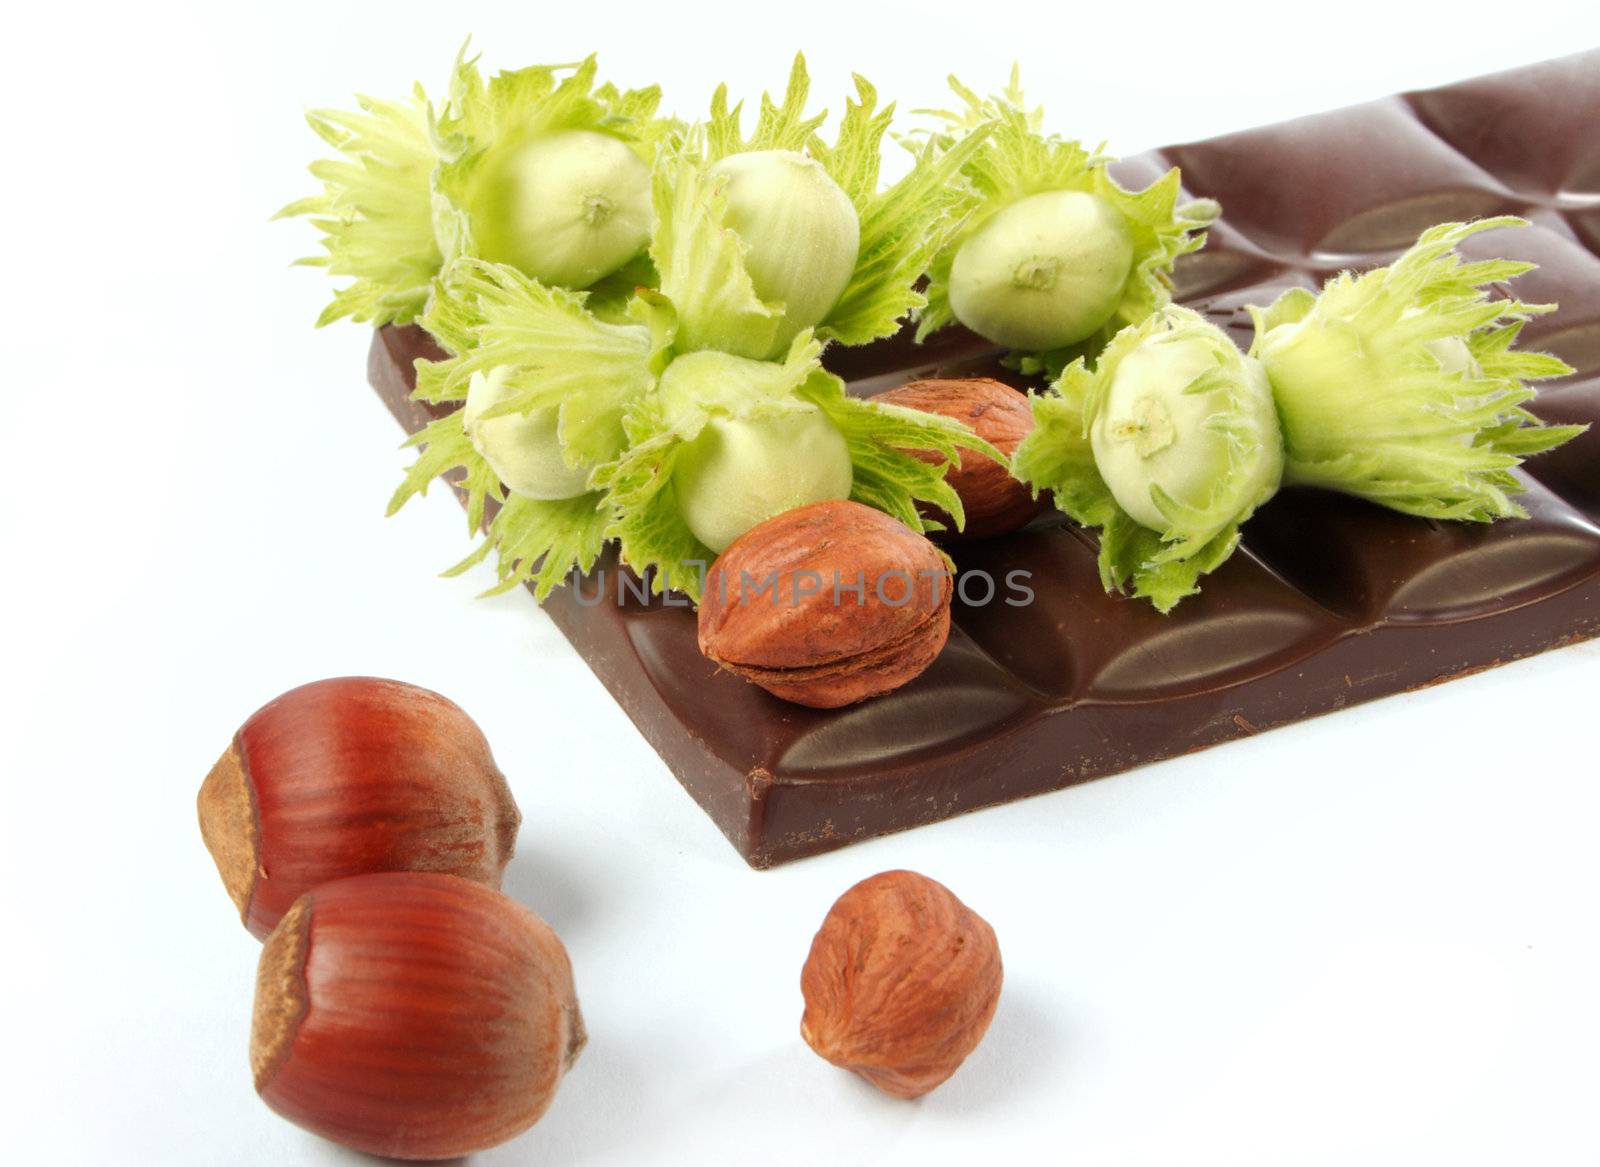 Piece of chocolate and wood nuts on a white background